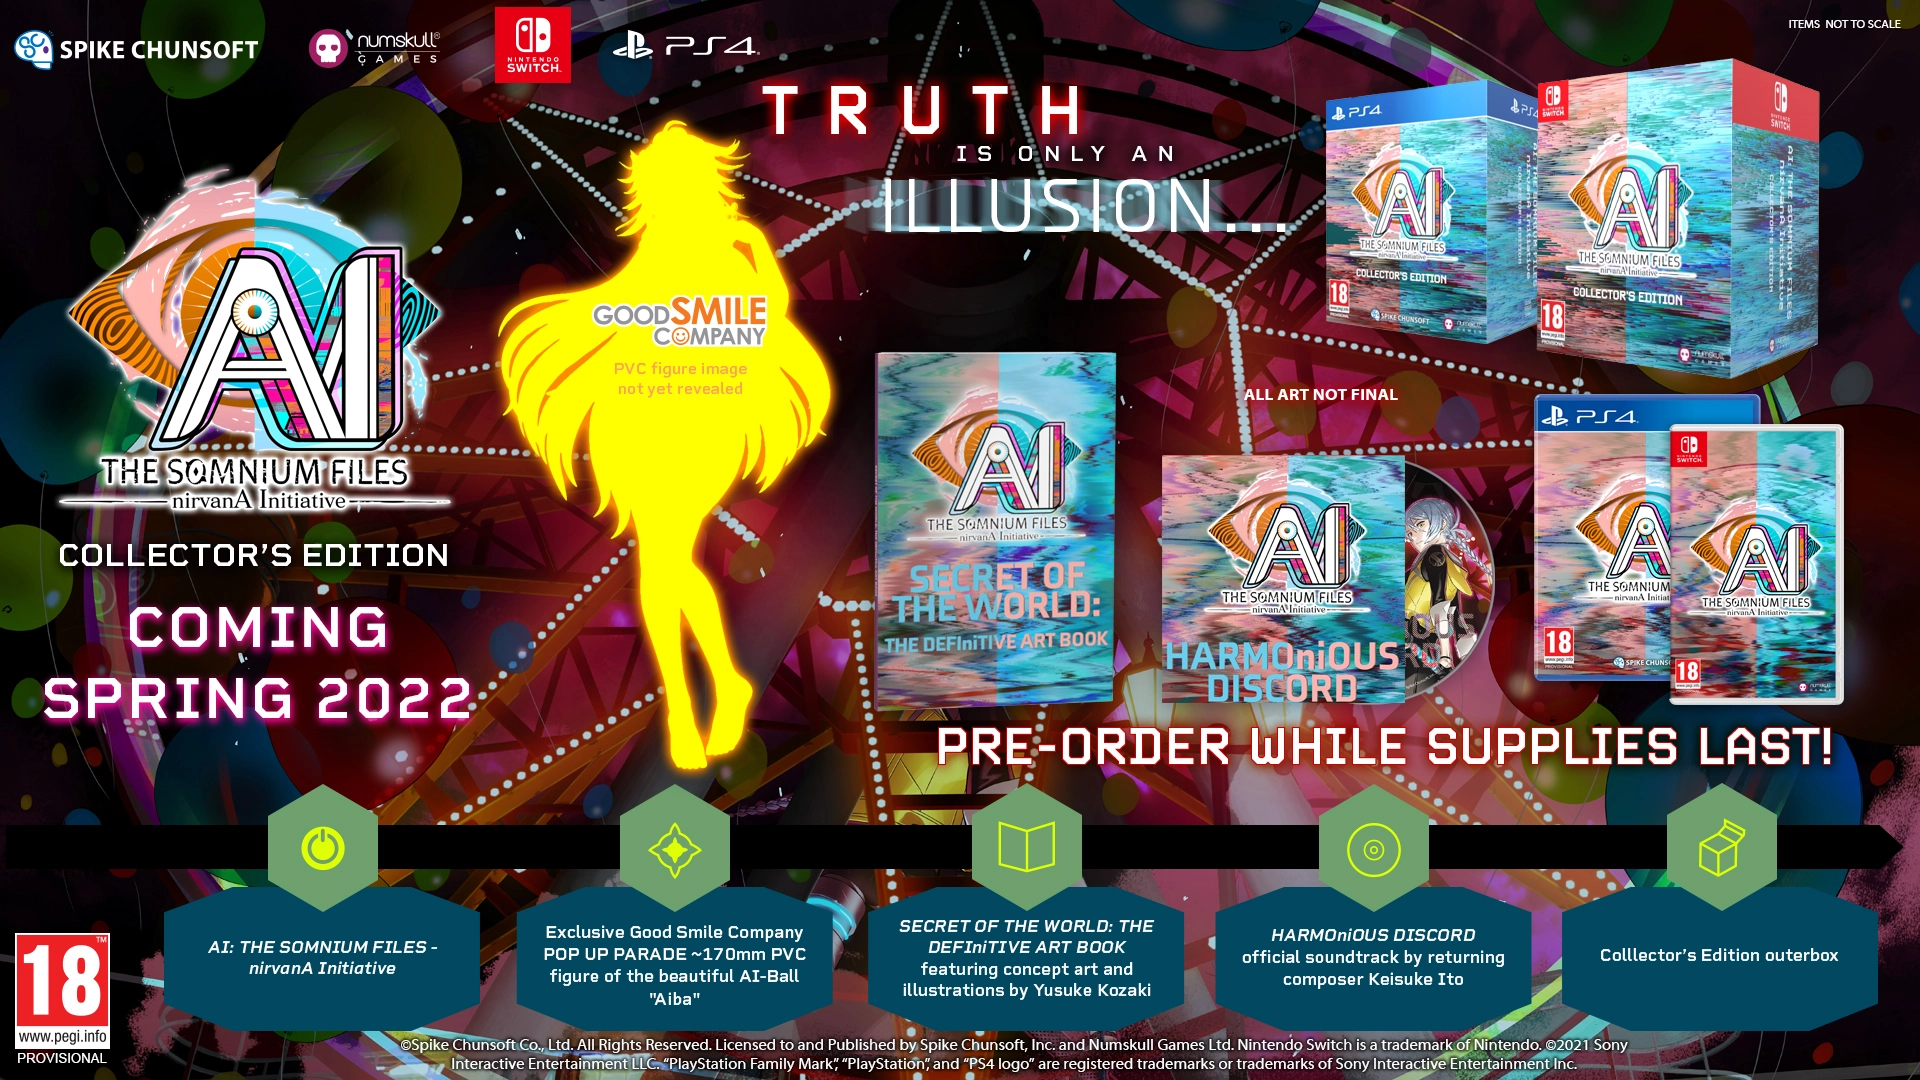 AI: The Somnium Files – nirvanA Initiative - Collector's Edition (PS4), Numskull Games